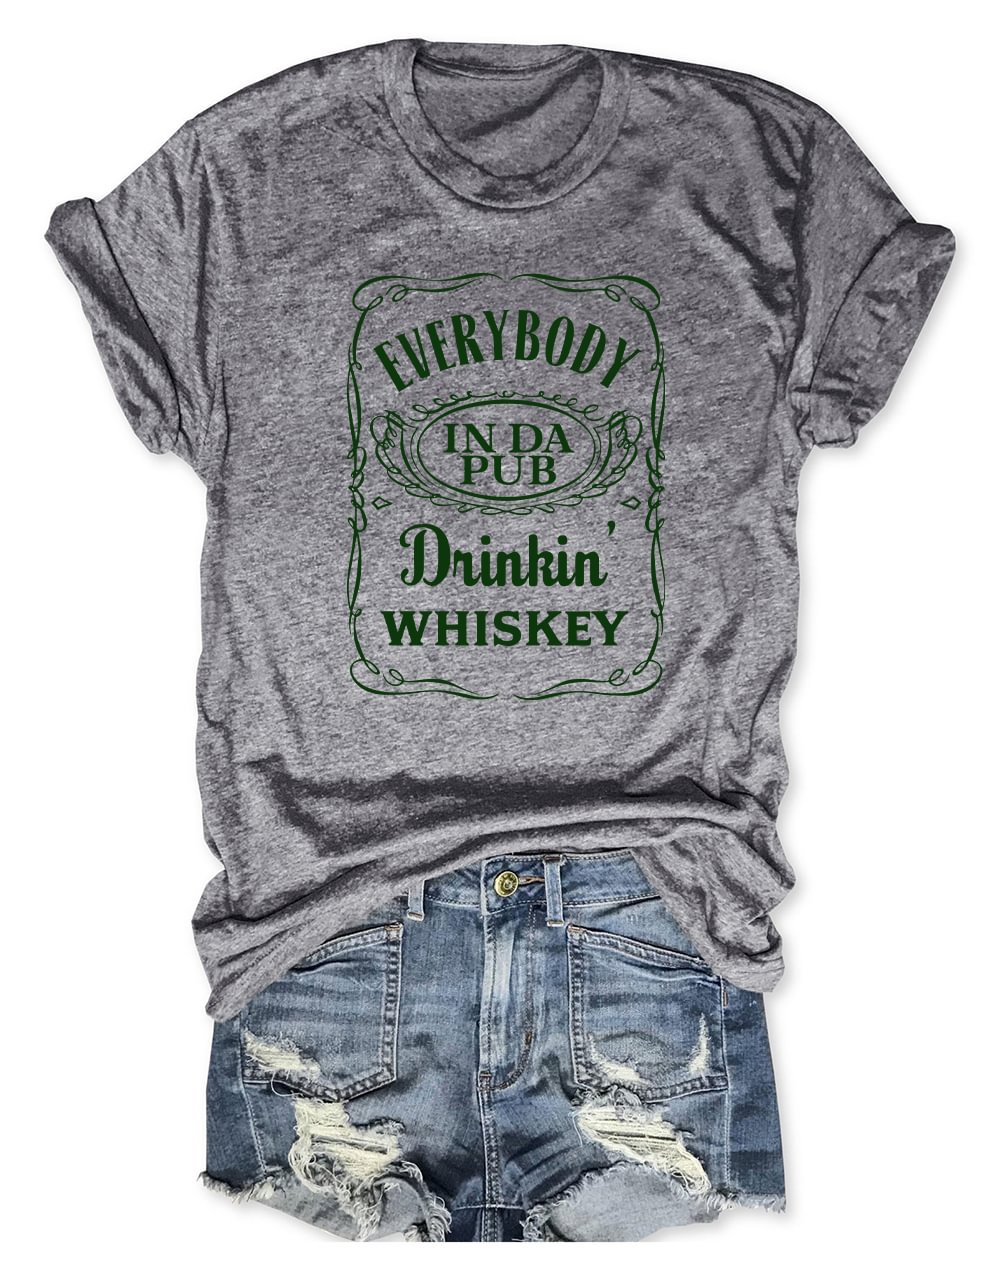 Everybody in the Pub Drinkin' Whiskey T-Shirt